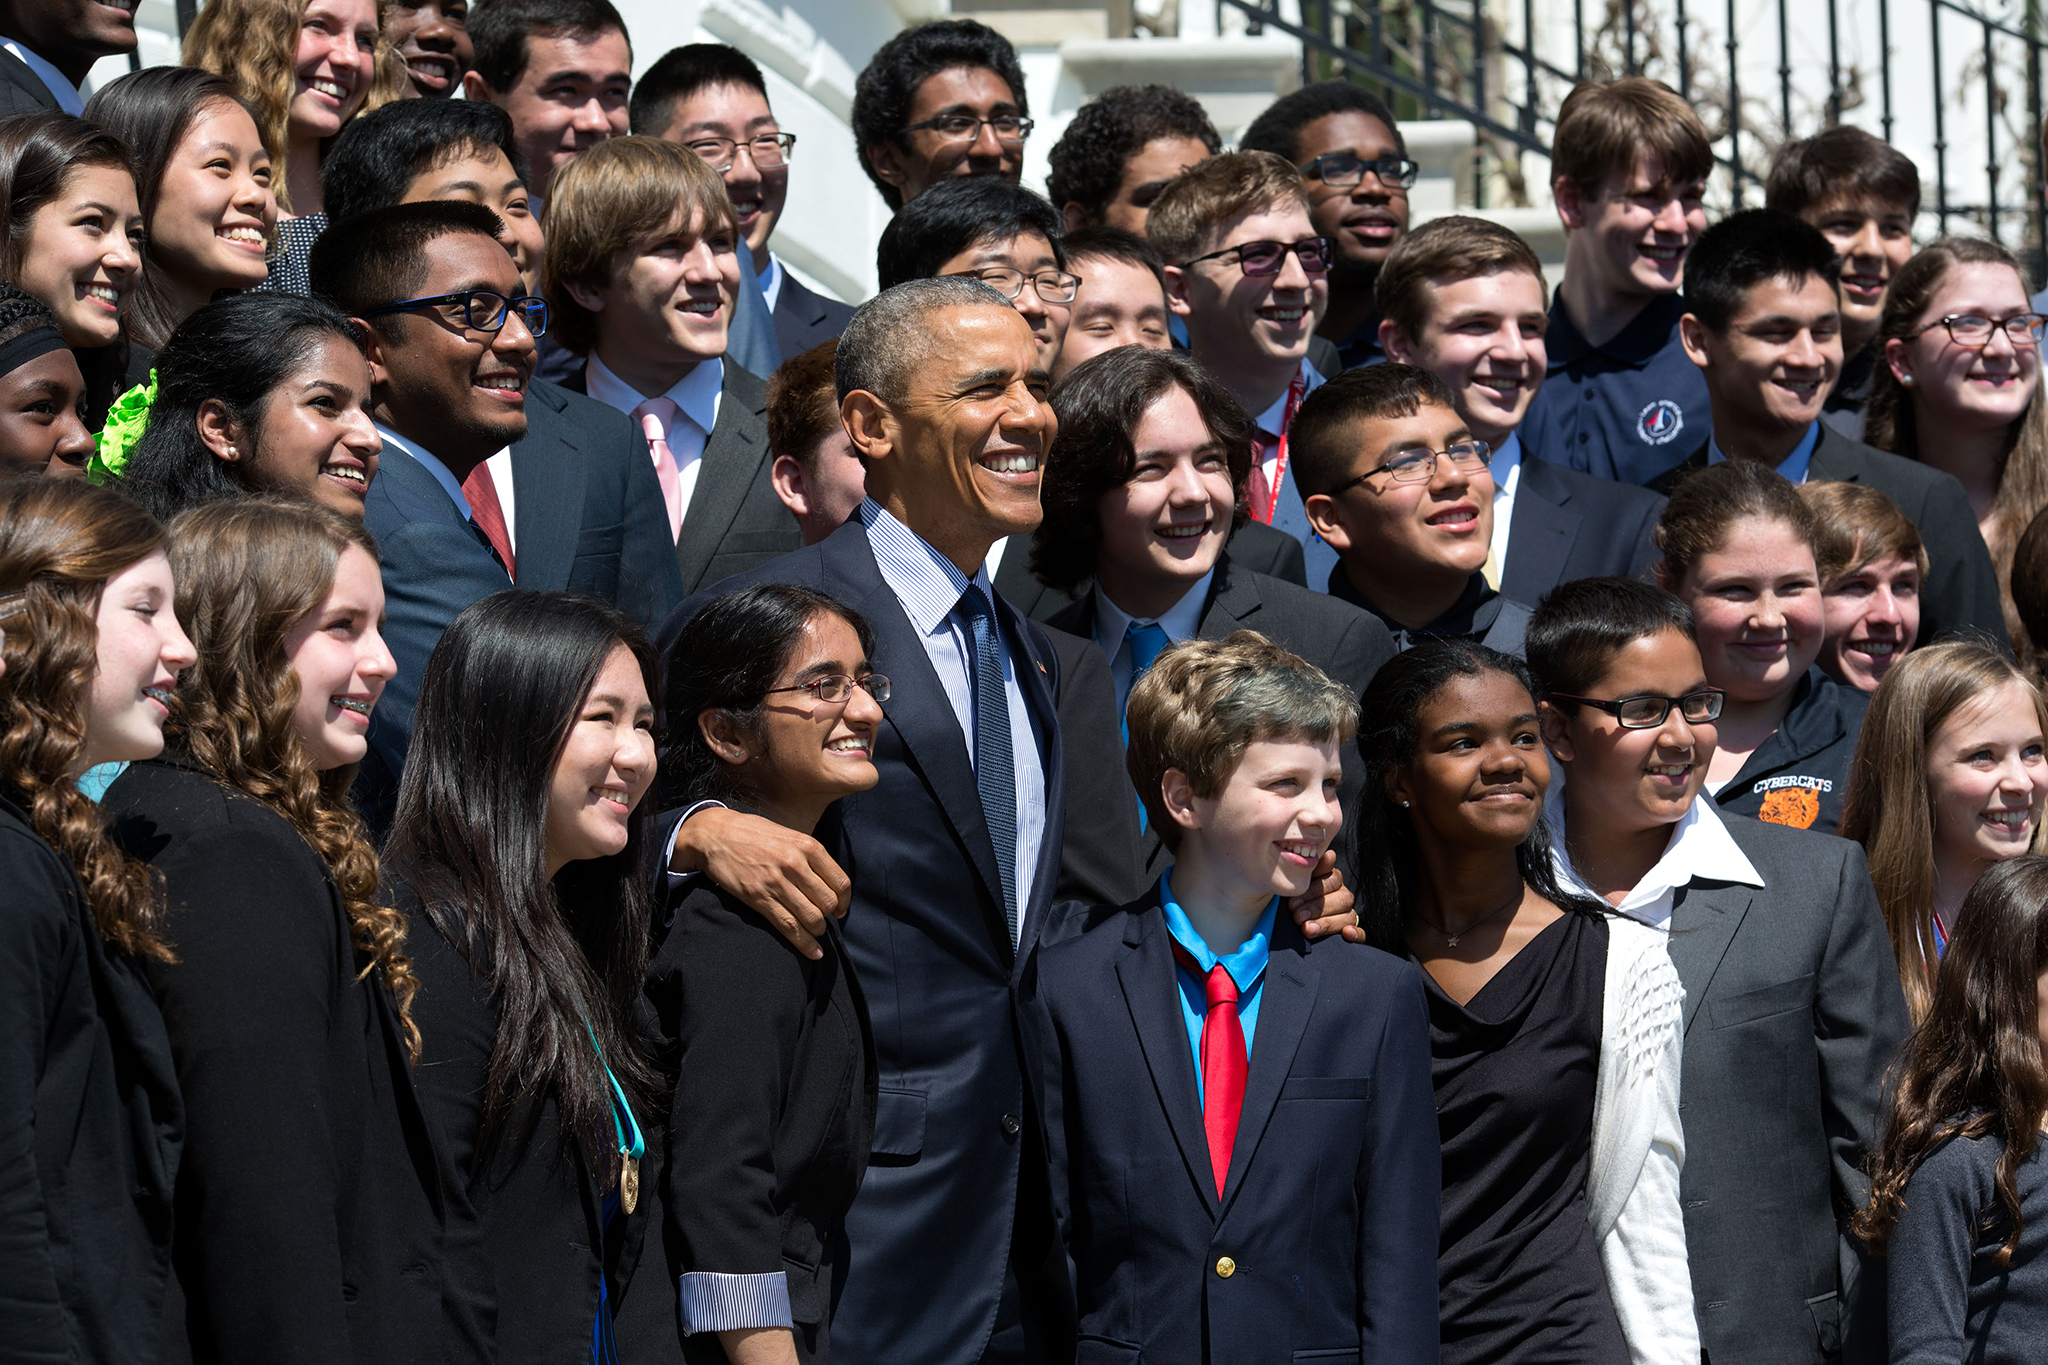 President Obama poses with young scientists at his Final White House Science Fair 